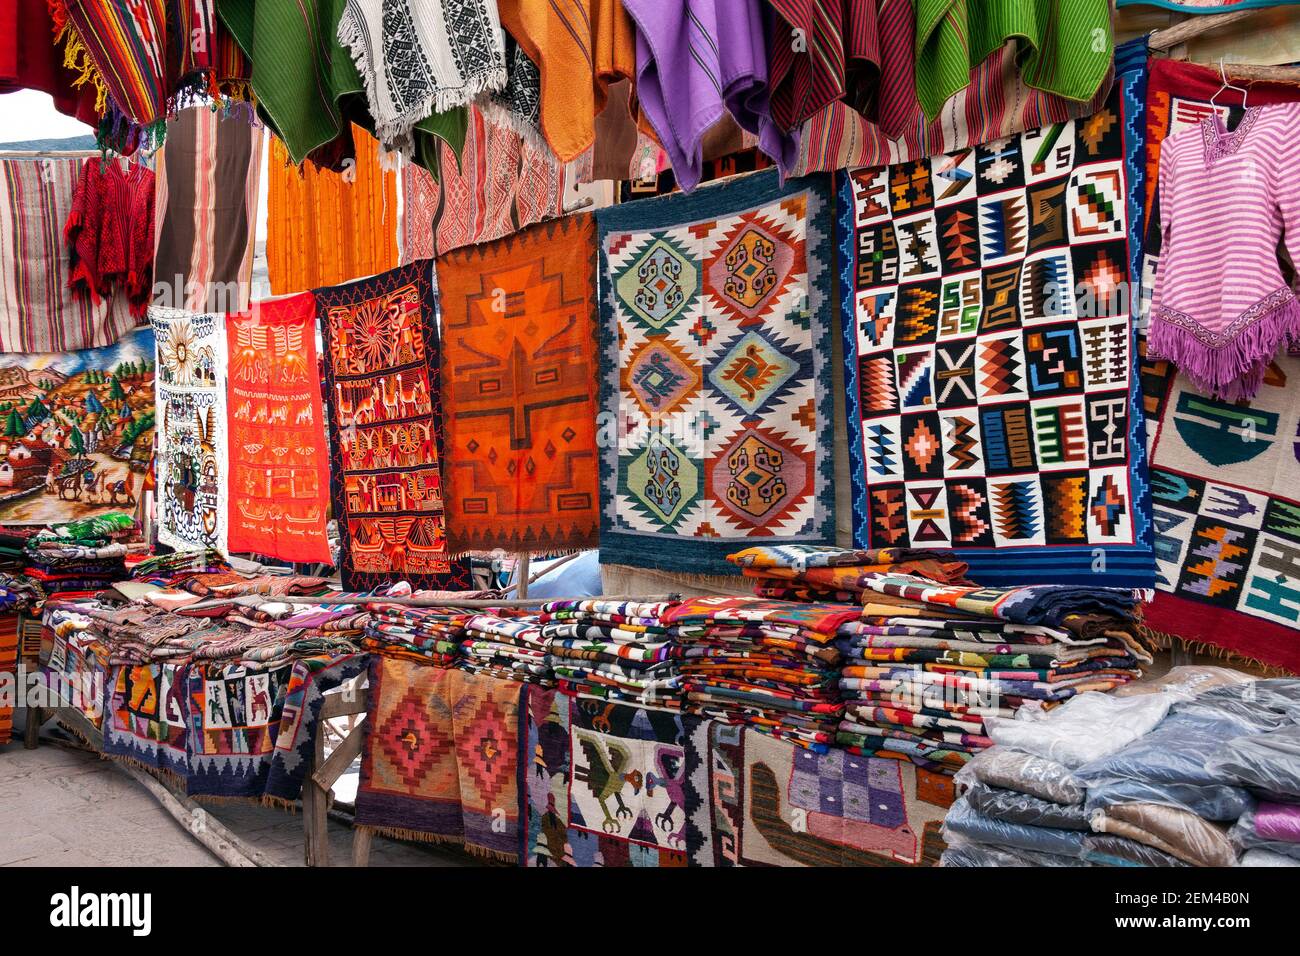 Pisac. Peru. 04.19.08. Local fabrics for sale on a market stall in the small town of Pisac in Urubamba Province, Peru in South America. Stock Photo